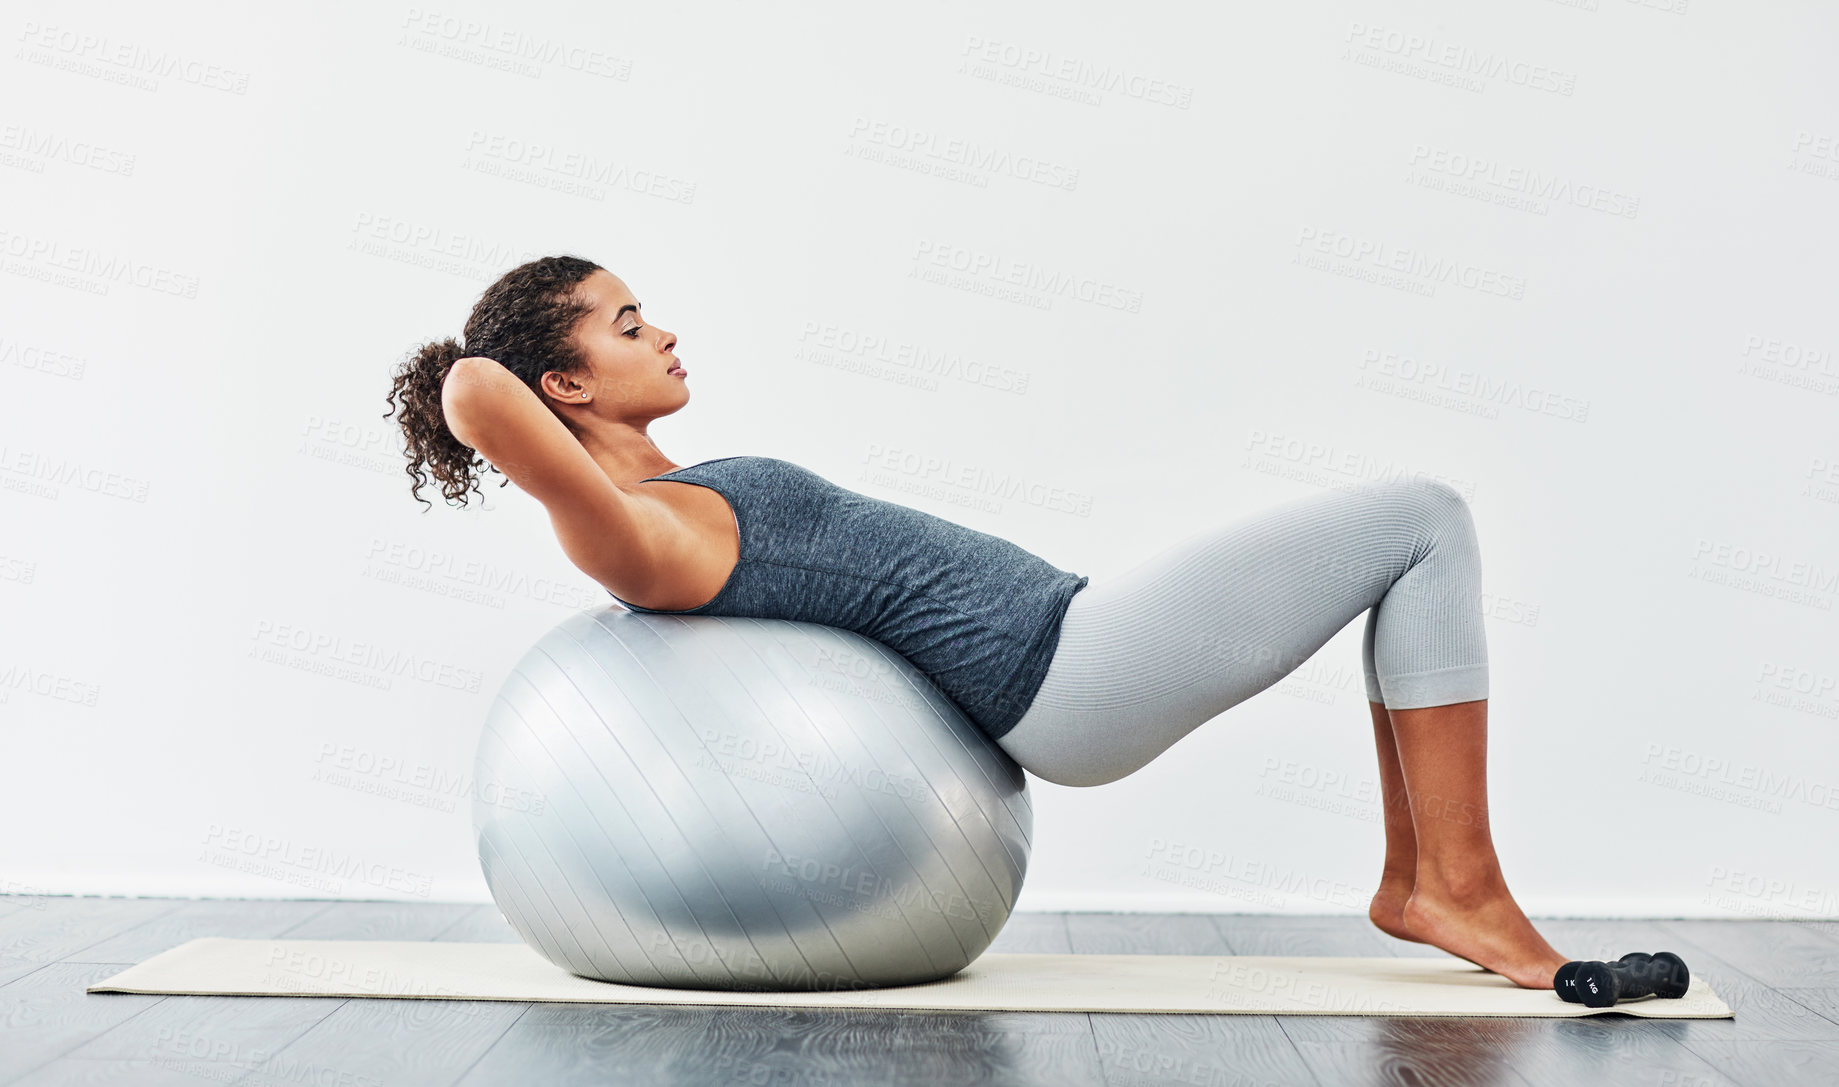 Buy stock photo Shot of a young woman exercising using a fitness ball